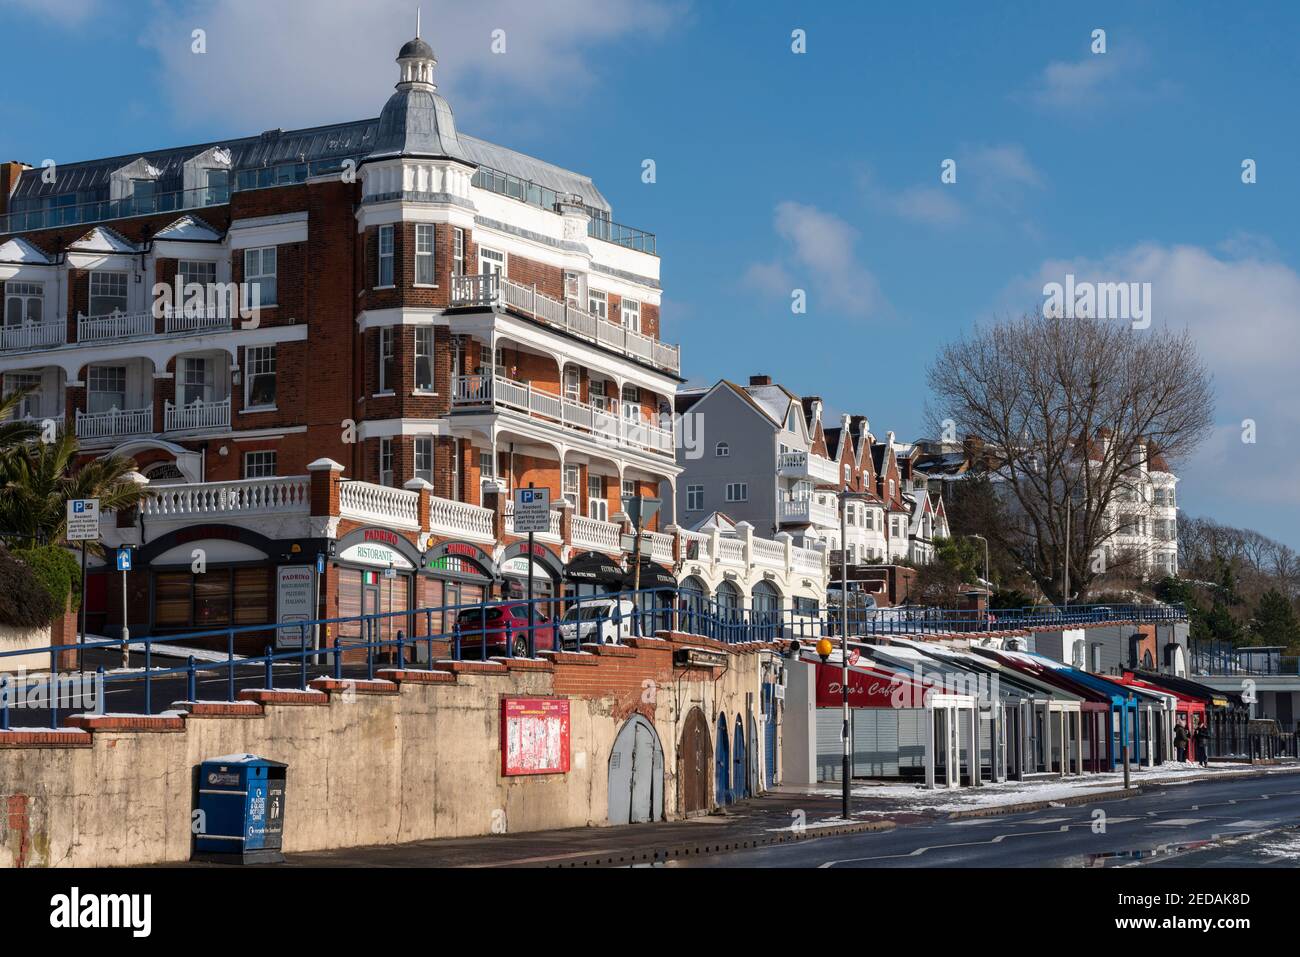 Palmeira Mansions, Shorefield Road climbing above Western Esplanade in Westcliff on Sea, Essex, UK. Leas conservation area, red brick architecture. Stock Photo